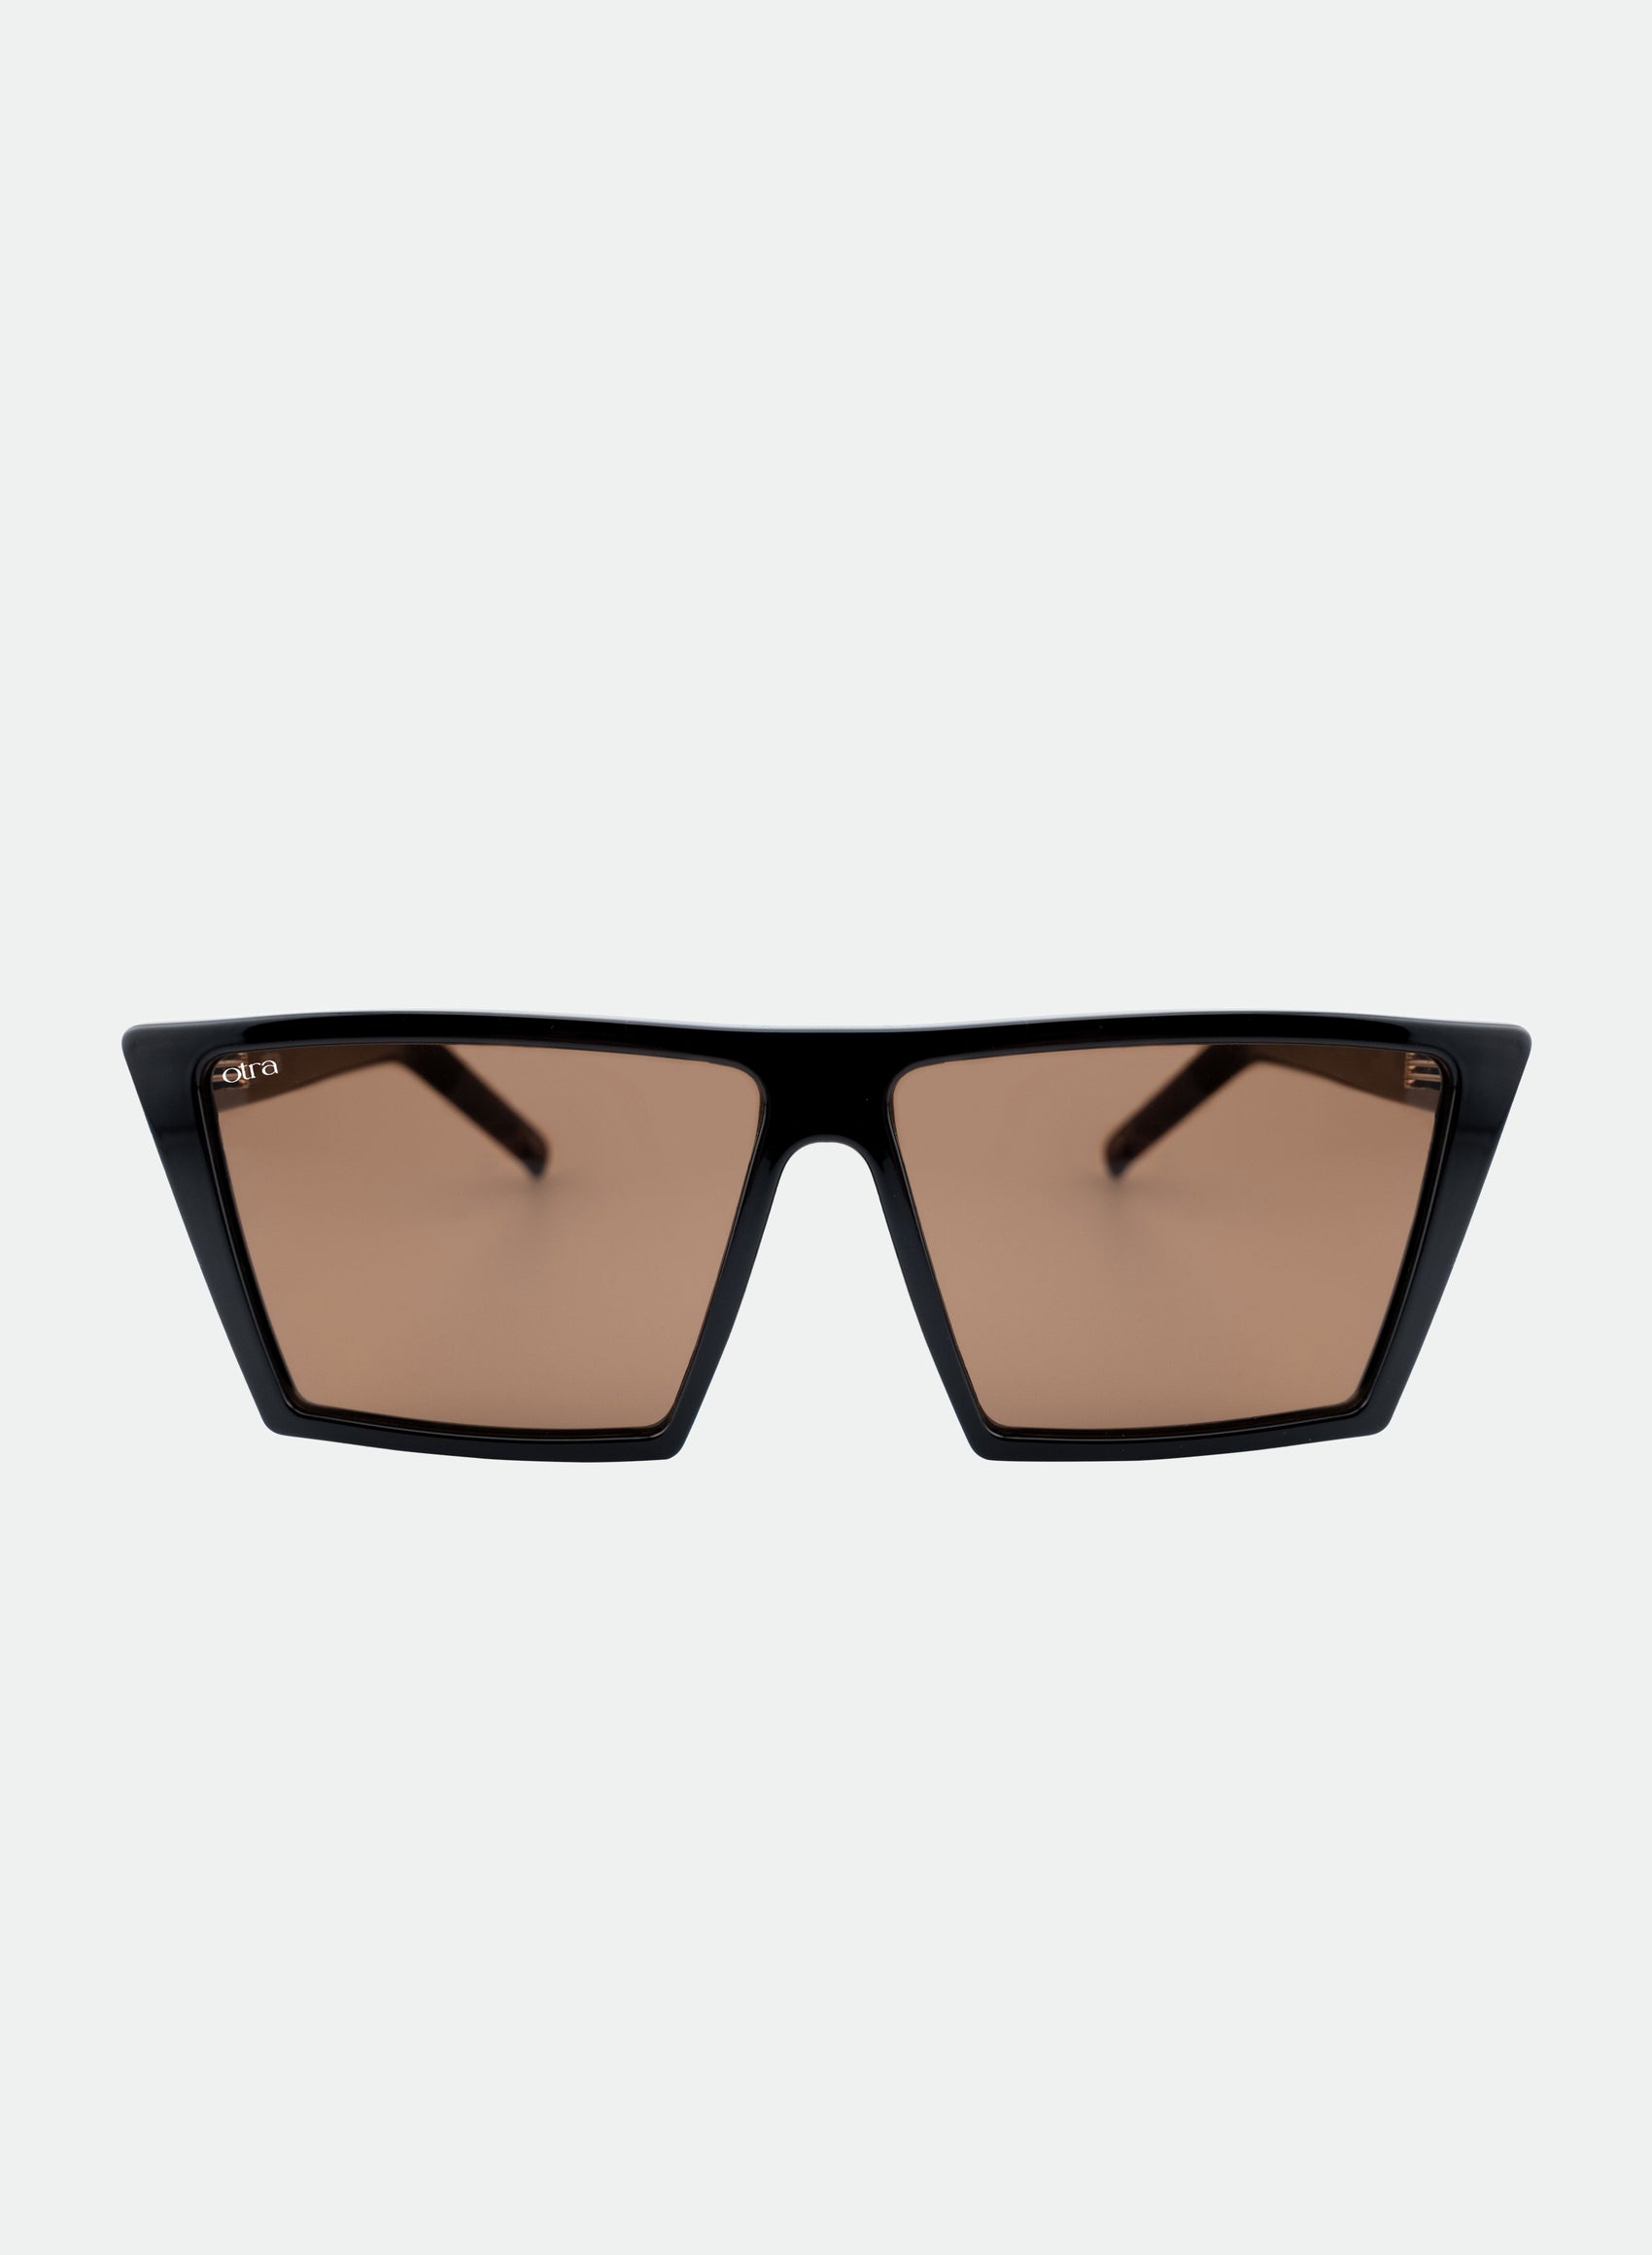 Ascot sunglasses with brown lens